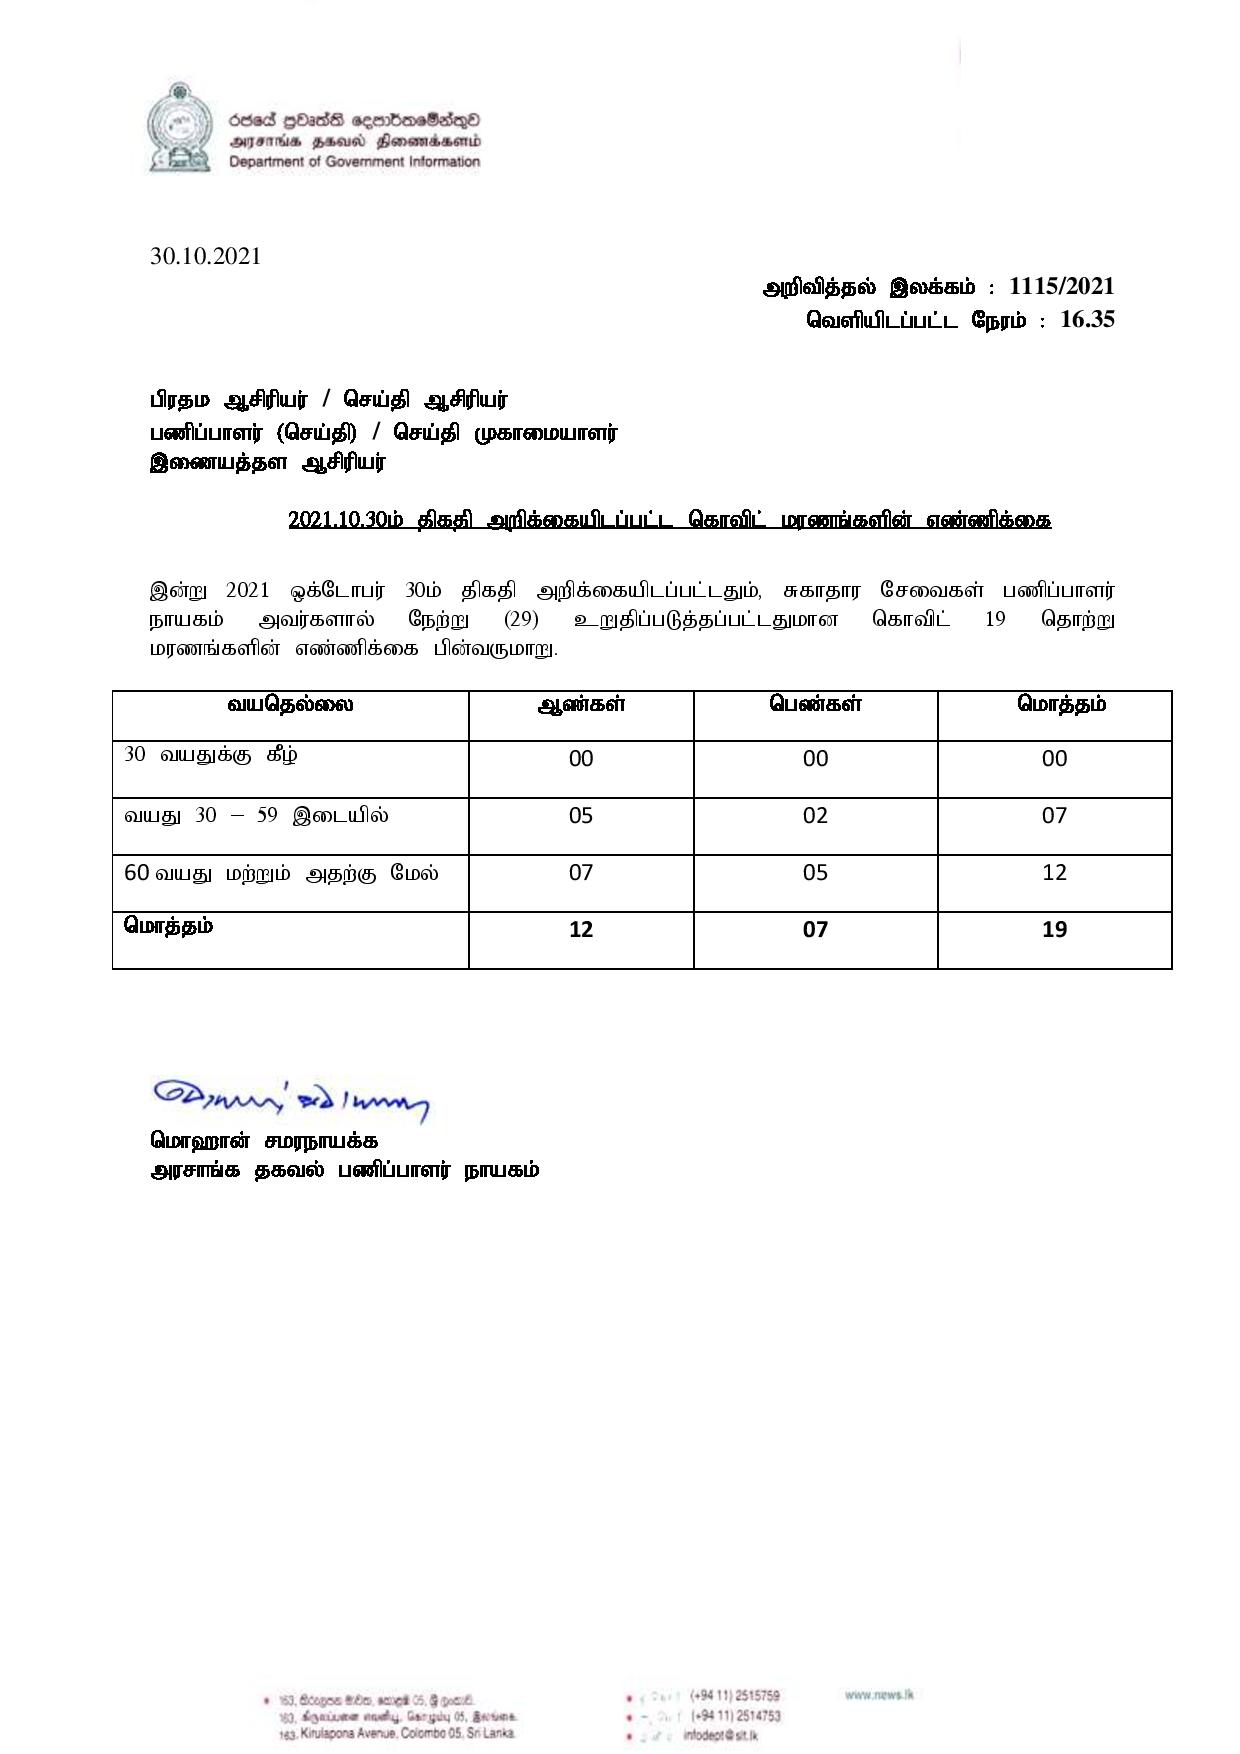 Press Release 1115 Tamil page 001